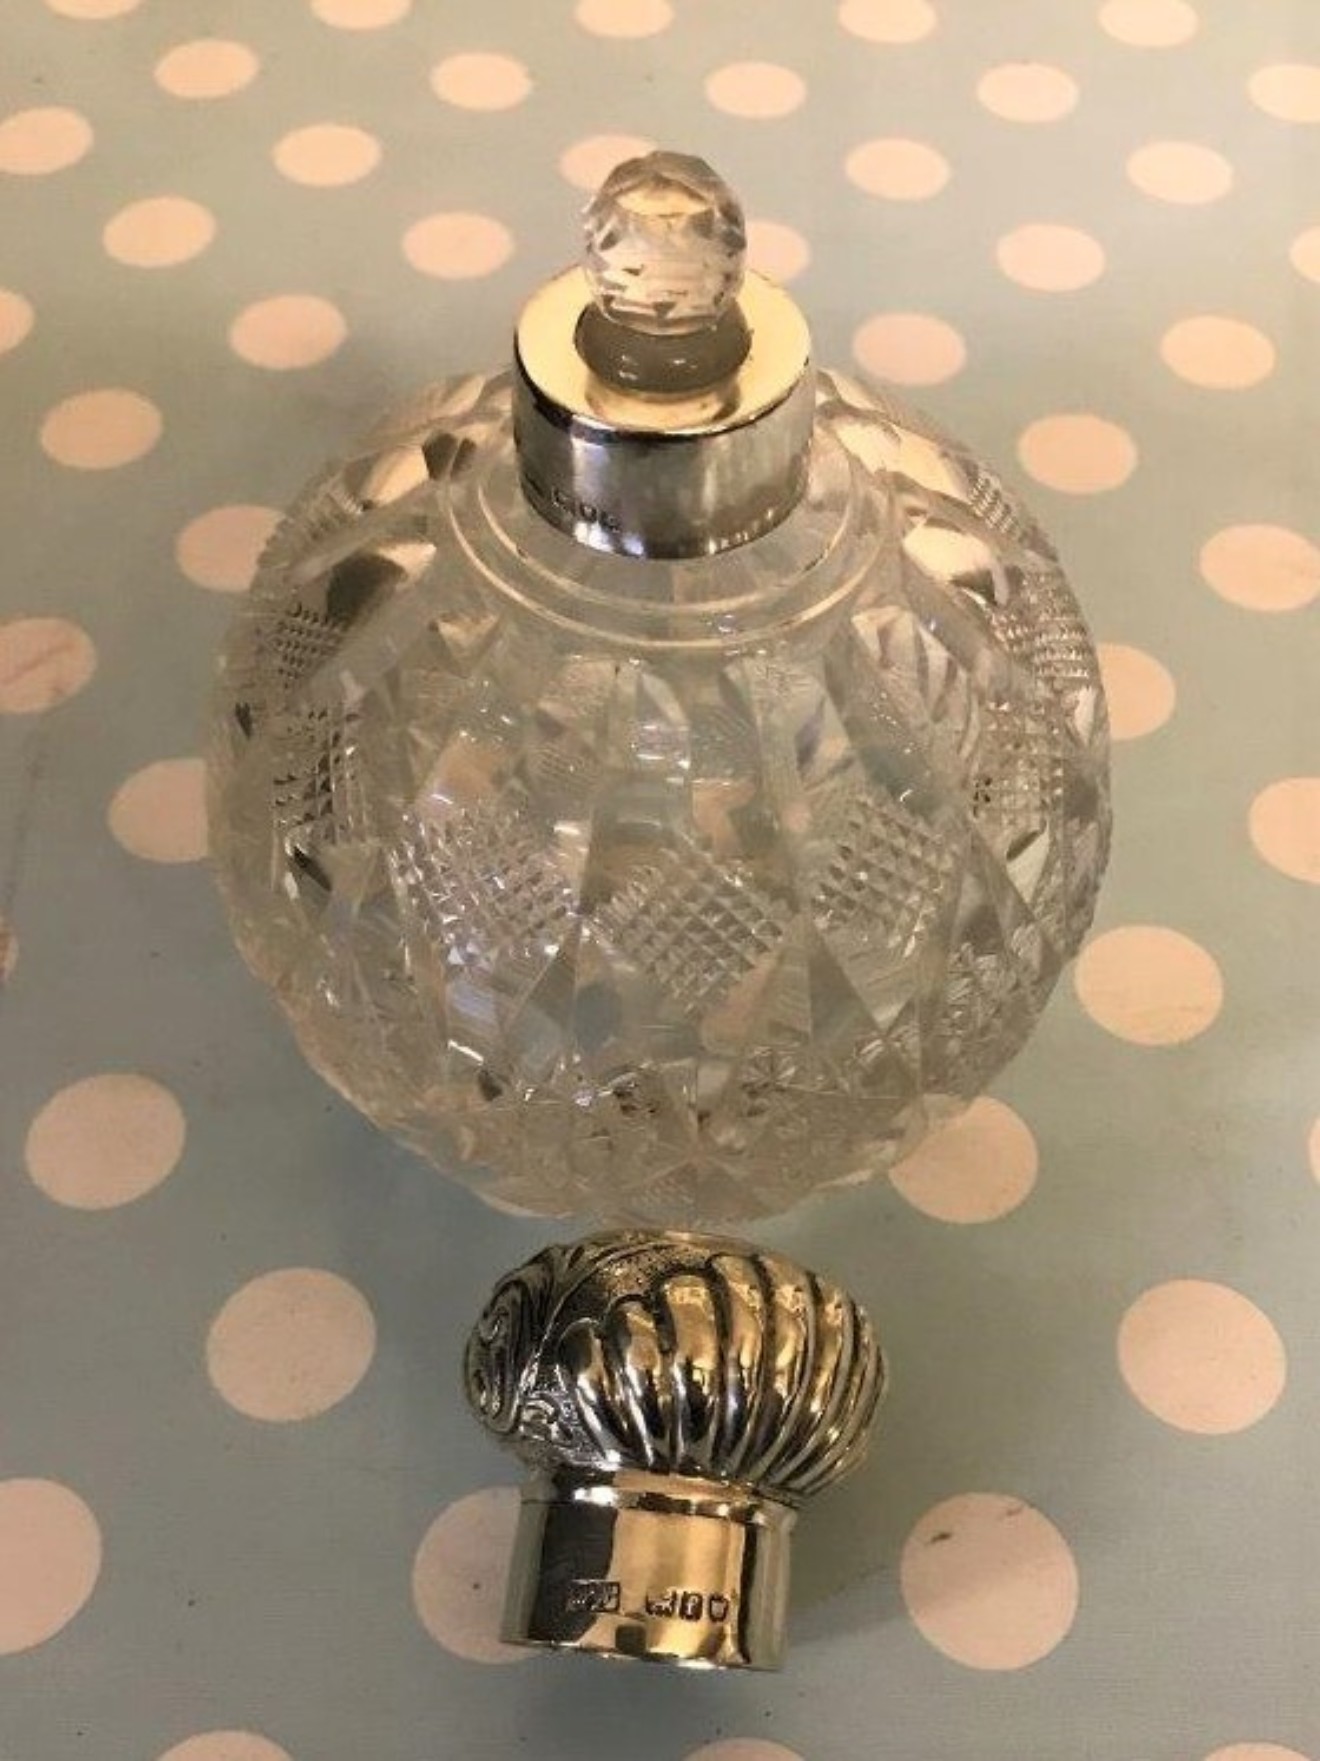 Silver Top Scent Bottle